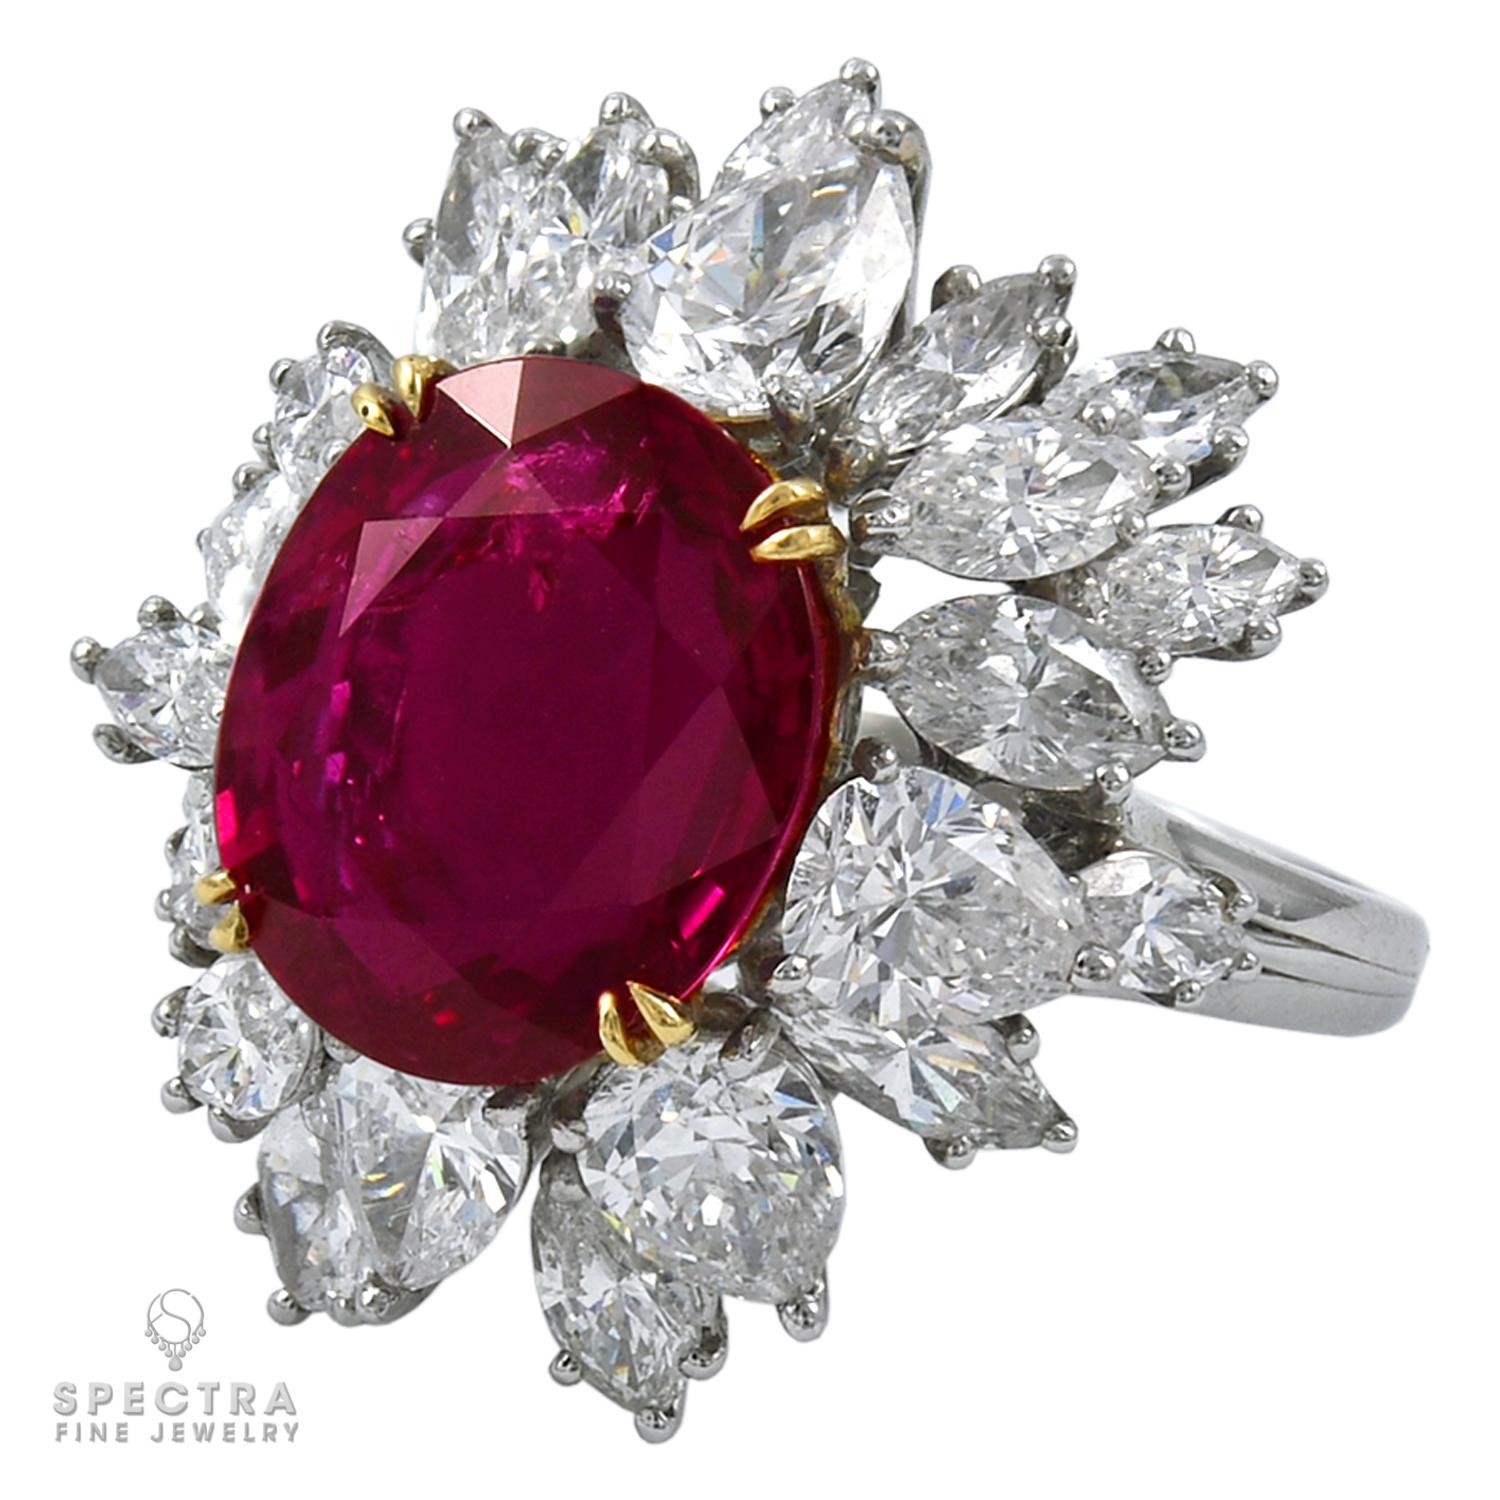 Burmese rubies are arguably the gold standard by which every ruby is measured. Known for rarity and saturation of color, rubies of the Burmese origin are prized for their intense red palette caused by a high chromium content in the ground from which